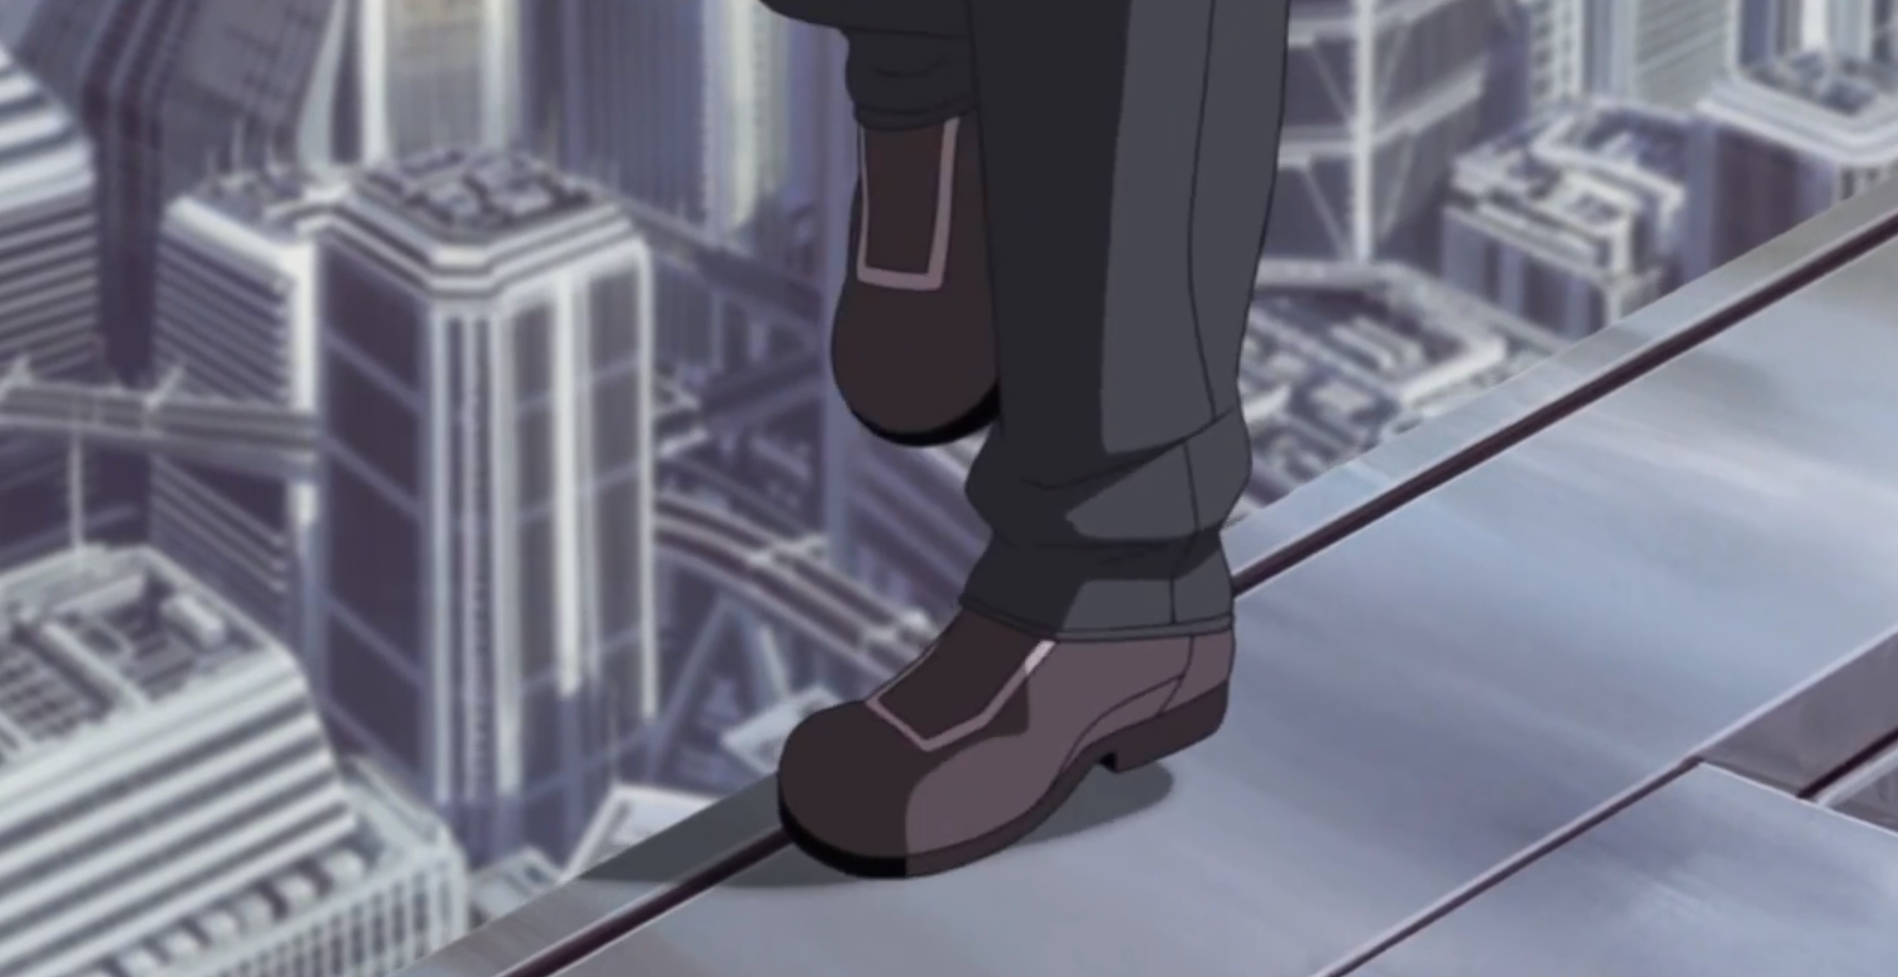 The Major on the roof Motoko Kusanagi, Ghost in the Shell: Stand Alone Complex, episode 20, Production IG, 2002